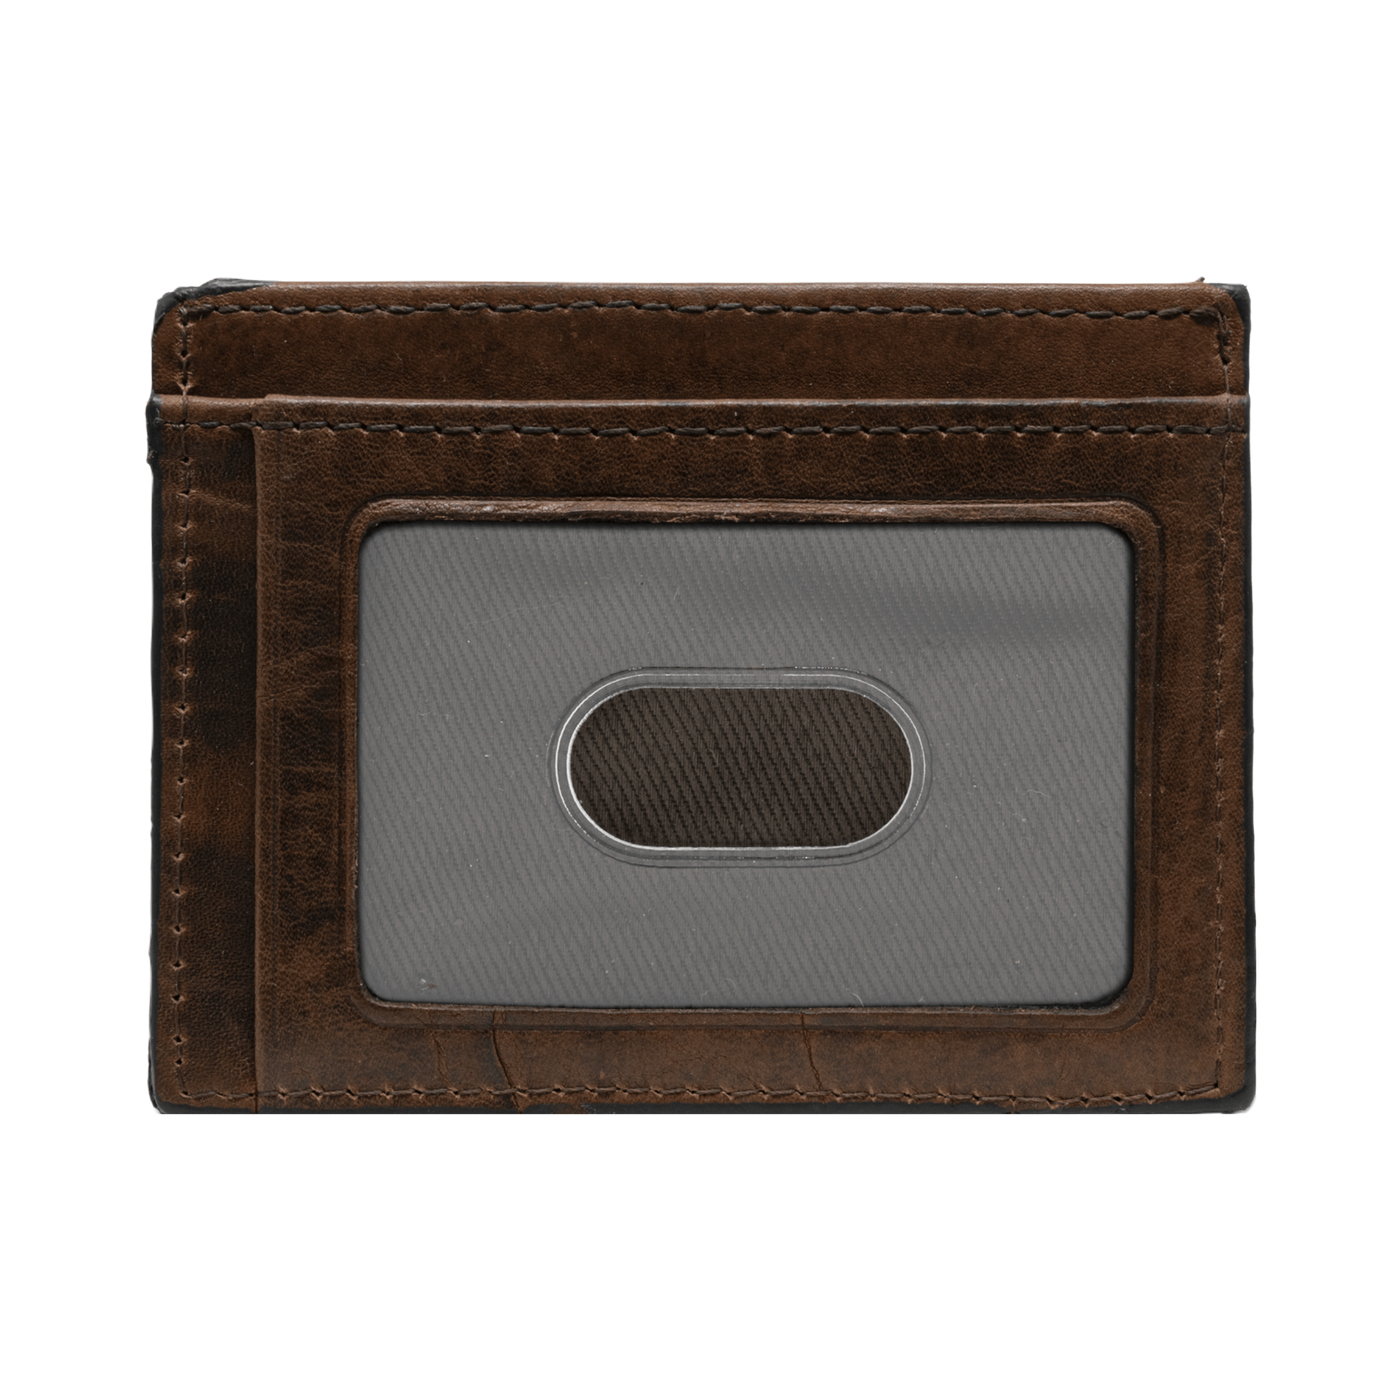 For those who prefer a more minimalist style, check out our Dynasty Minimalist Elk Wallet, with its premier full grain leather and hand-oiled stylish finish, you won't be disappointed. 3 Card Slots ID Window Center Bill Compartment Ultra Slim Minimalist Design Weber’s Signature Elk Concho Dimensions: 3"L x 4"H RFID Protection Color: Brown